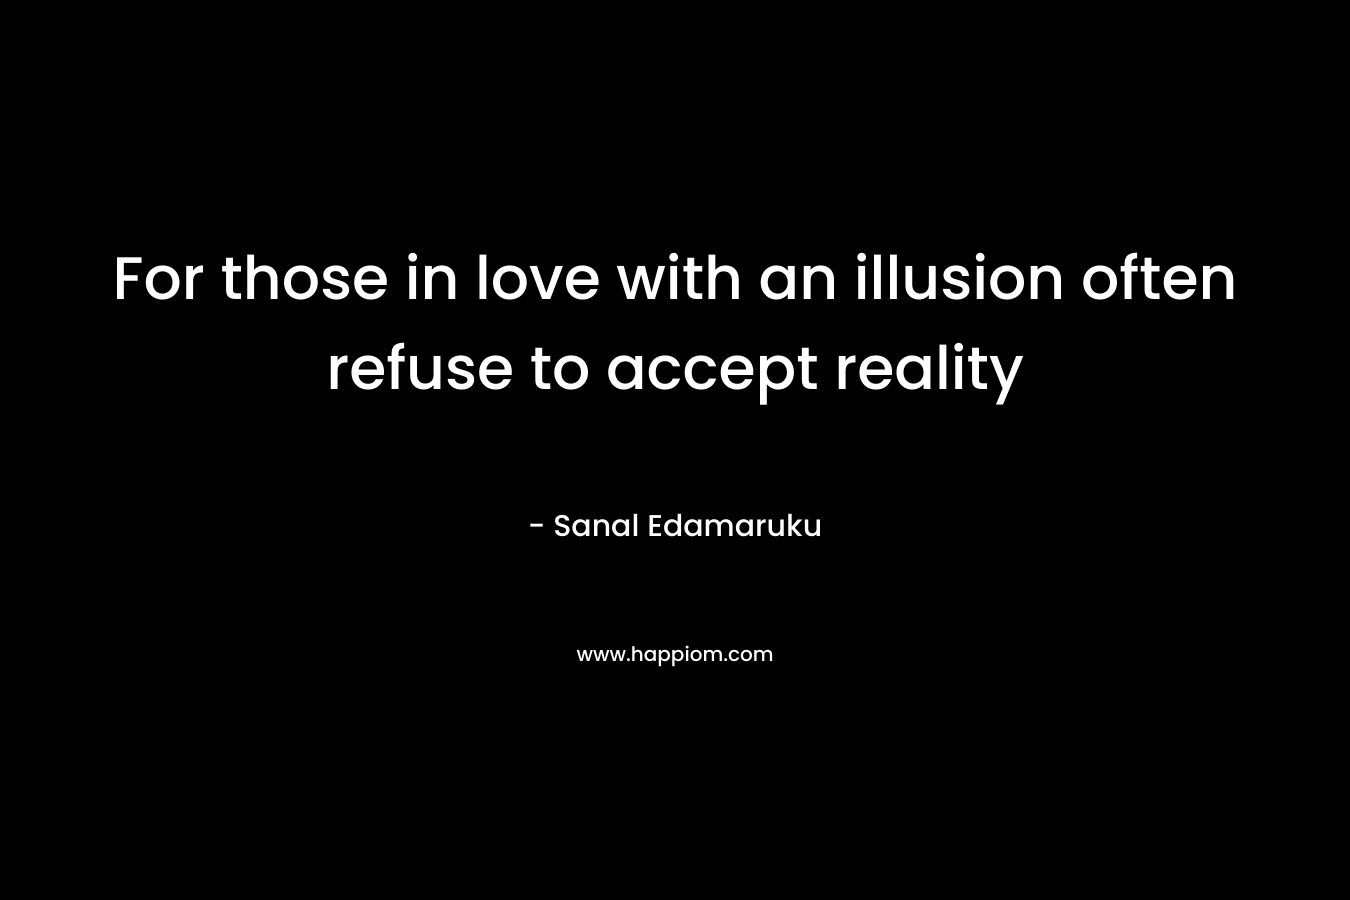 For those in love with an illusion often refuse to accept reality